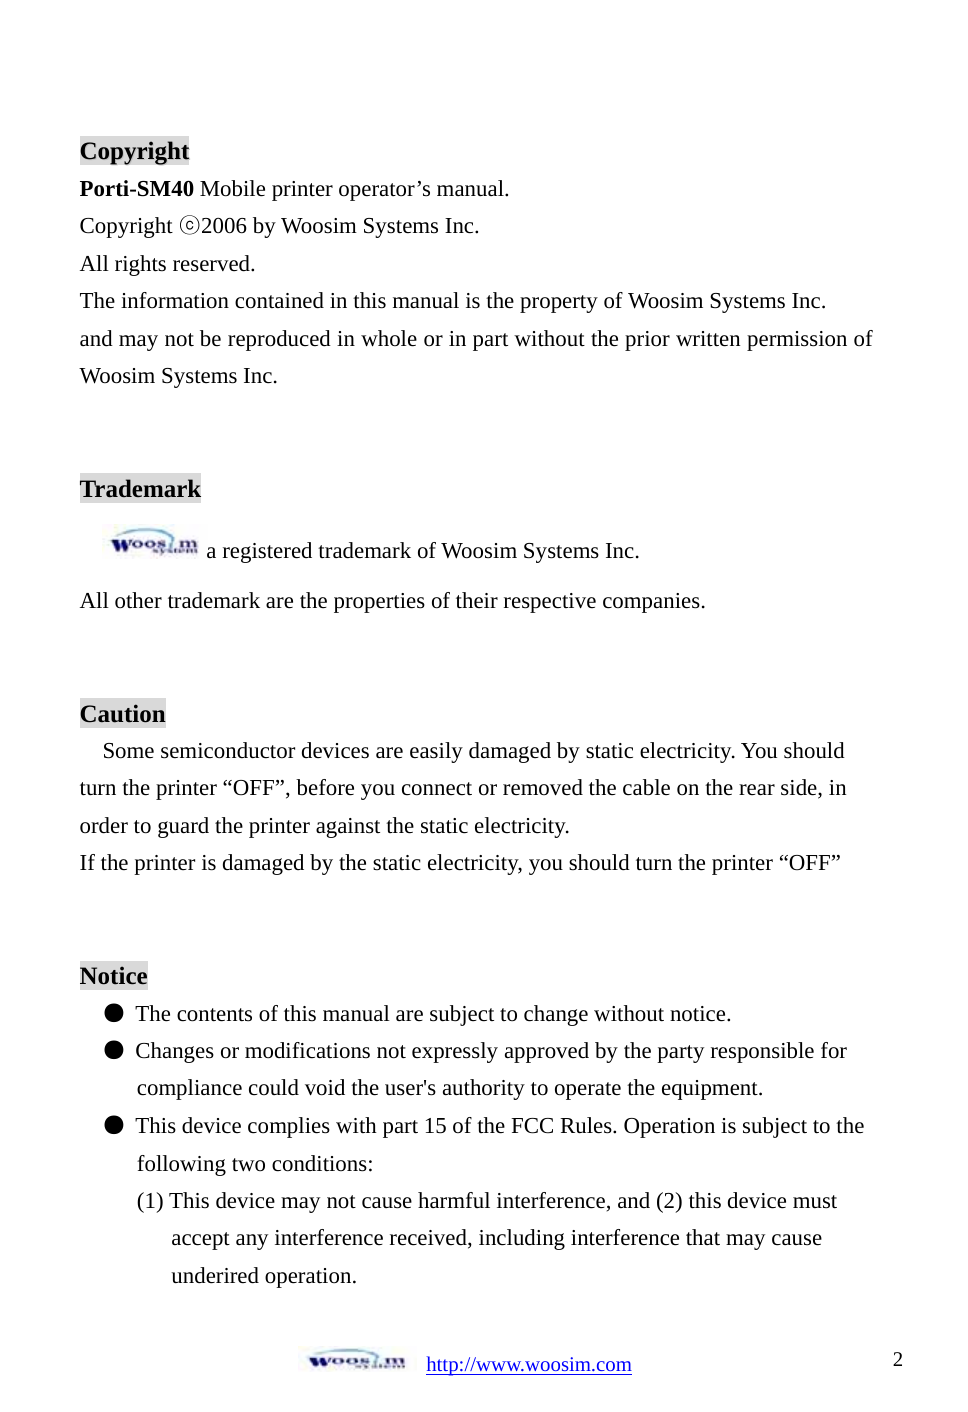 http://www.woosim.com 2CCooppyyrriigghhttPorti-SM40 Mobile printer operator’s manual. Copyright ᐕ2006 by Woosim Systems Inc. All rights reserved. The information contained in this manual is the property of Woosim Systems Inc. and may not be reproduced in whole or in part without the prior written permission of Woosim Systems Inc. Trademark a registered trademark of Woosim Systems Inc. All other trademark are the properties of their respective companies. CautionSome semiconductor devices are easily damaged by static electricity. You should turn the printer “OFF”, before you connect or removed the cable on the rear side, in order to guard the printer against the static electricity.   If the printer is damaged by the static electricity, you should turn the printer “OFF” Noticeم͑ The contents of this manual are subject to change without notice. م͑ Changes or modifications not expressly approved by the party responsible for         compliance could void the user&apos;s authority to operate the equipment. م  This device complies with part 15 of the FCC Rules. Operation is subject to the        following two conditions:       (1) This device may not cause harmful interference, and (2) this device must             accept any interference received, including interference that may cause            underired operation. 